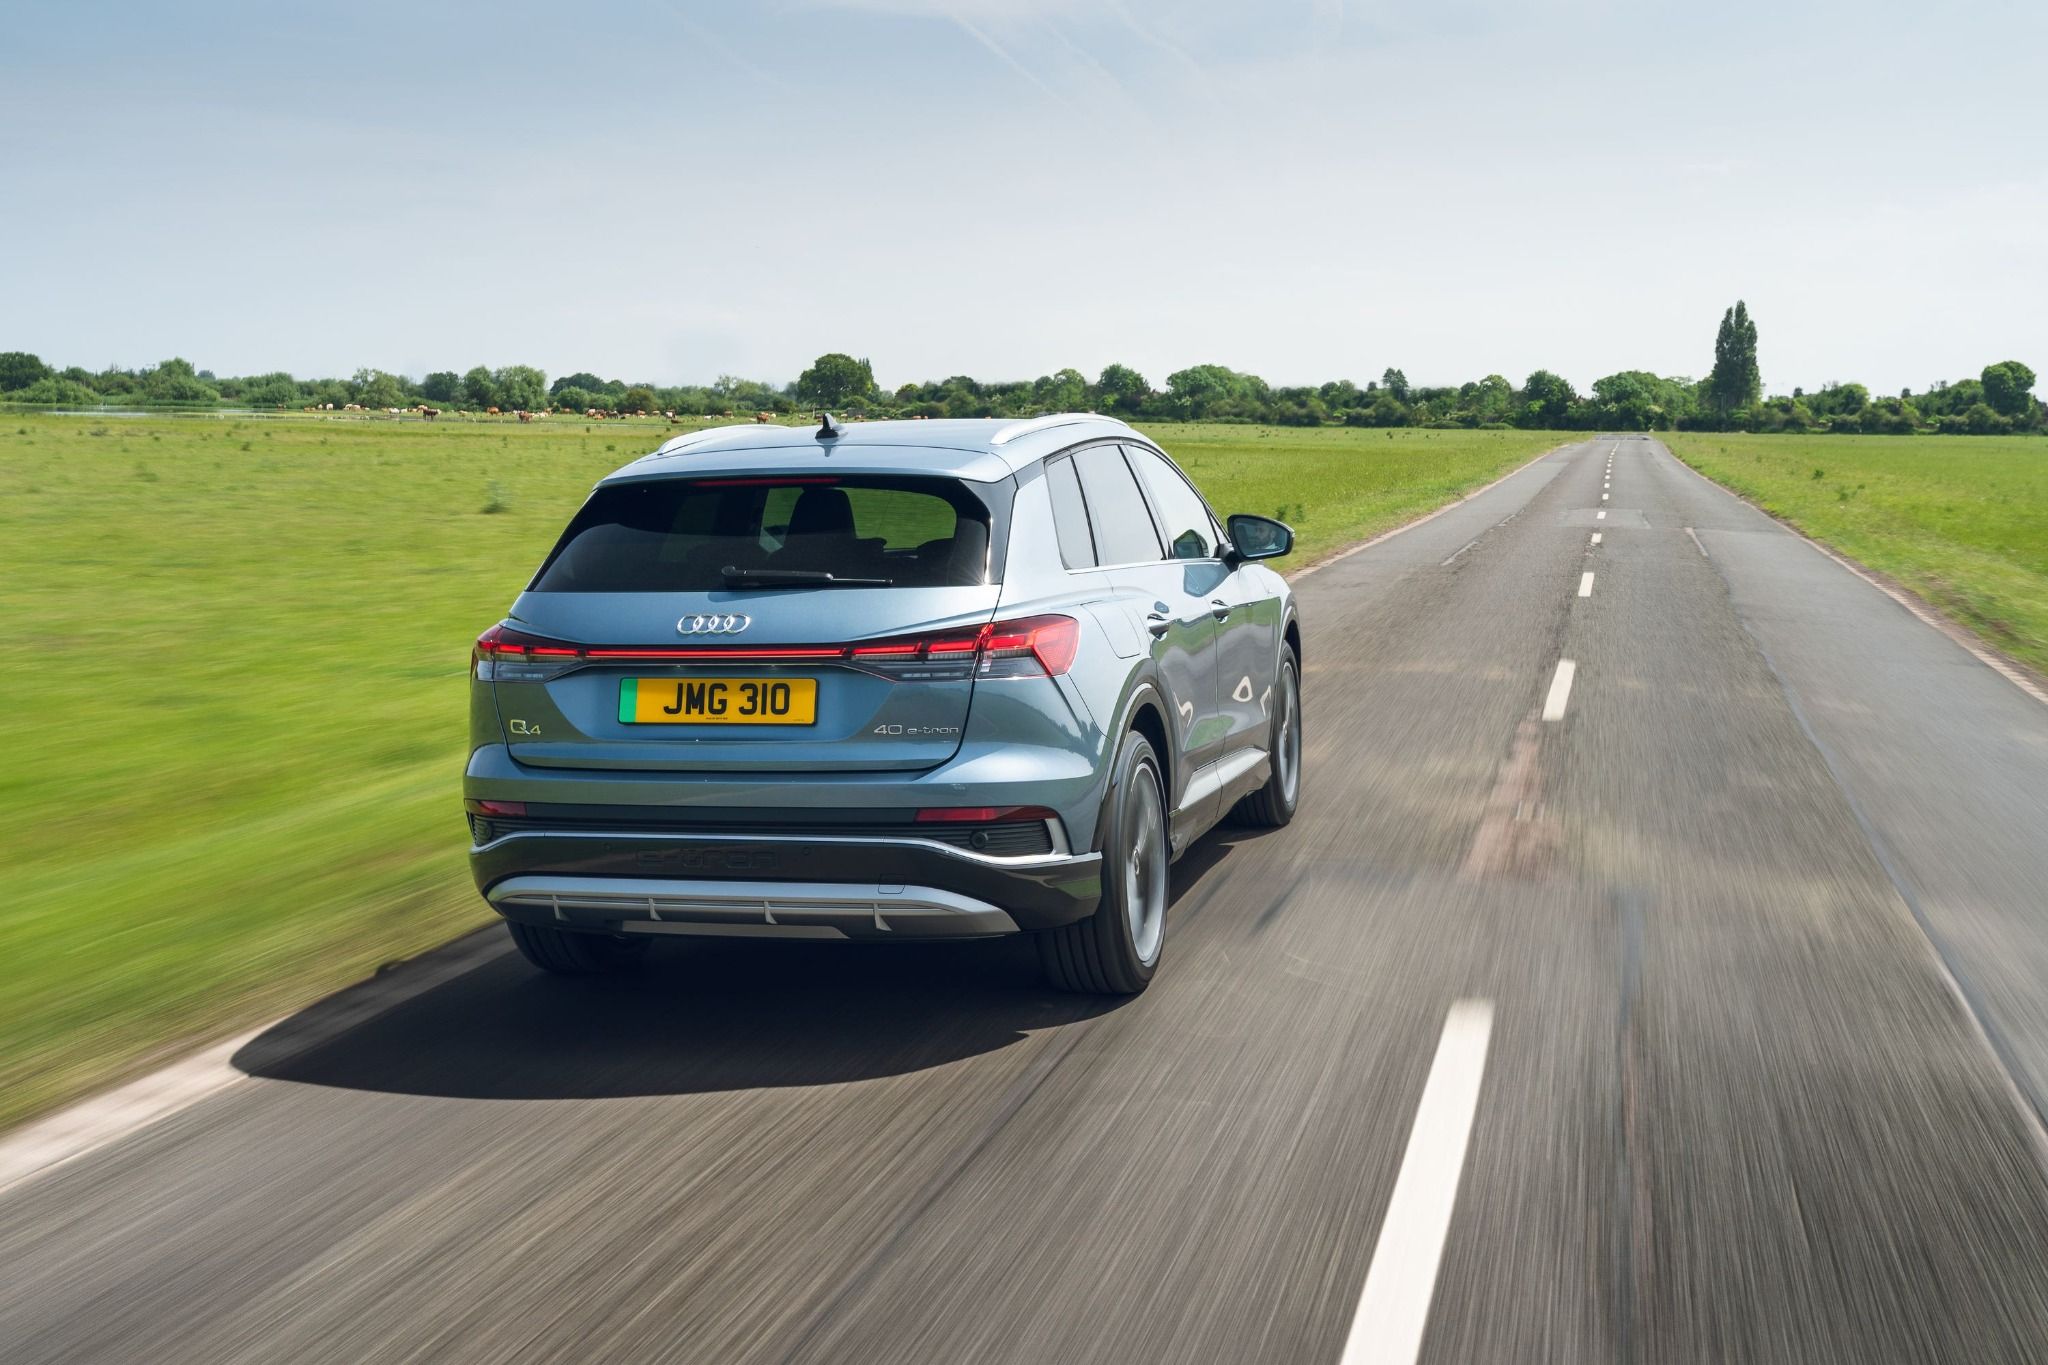 Grey Audi Q4 etron driving on the road